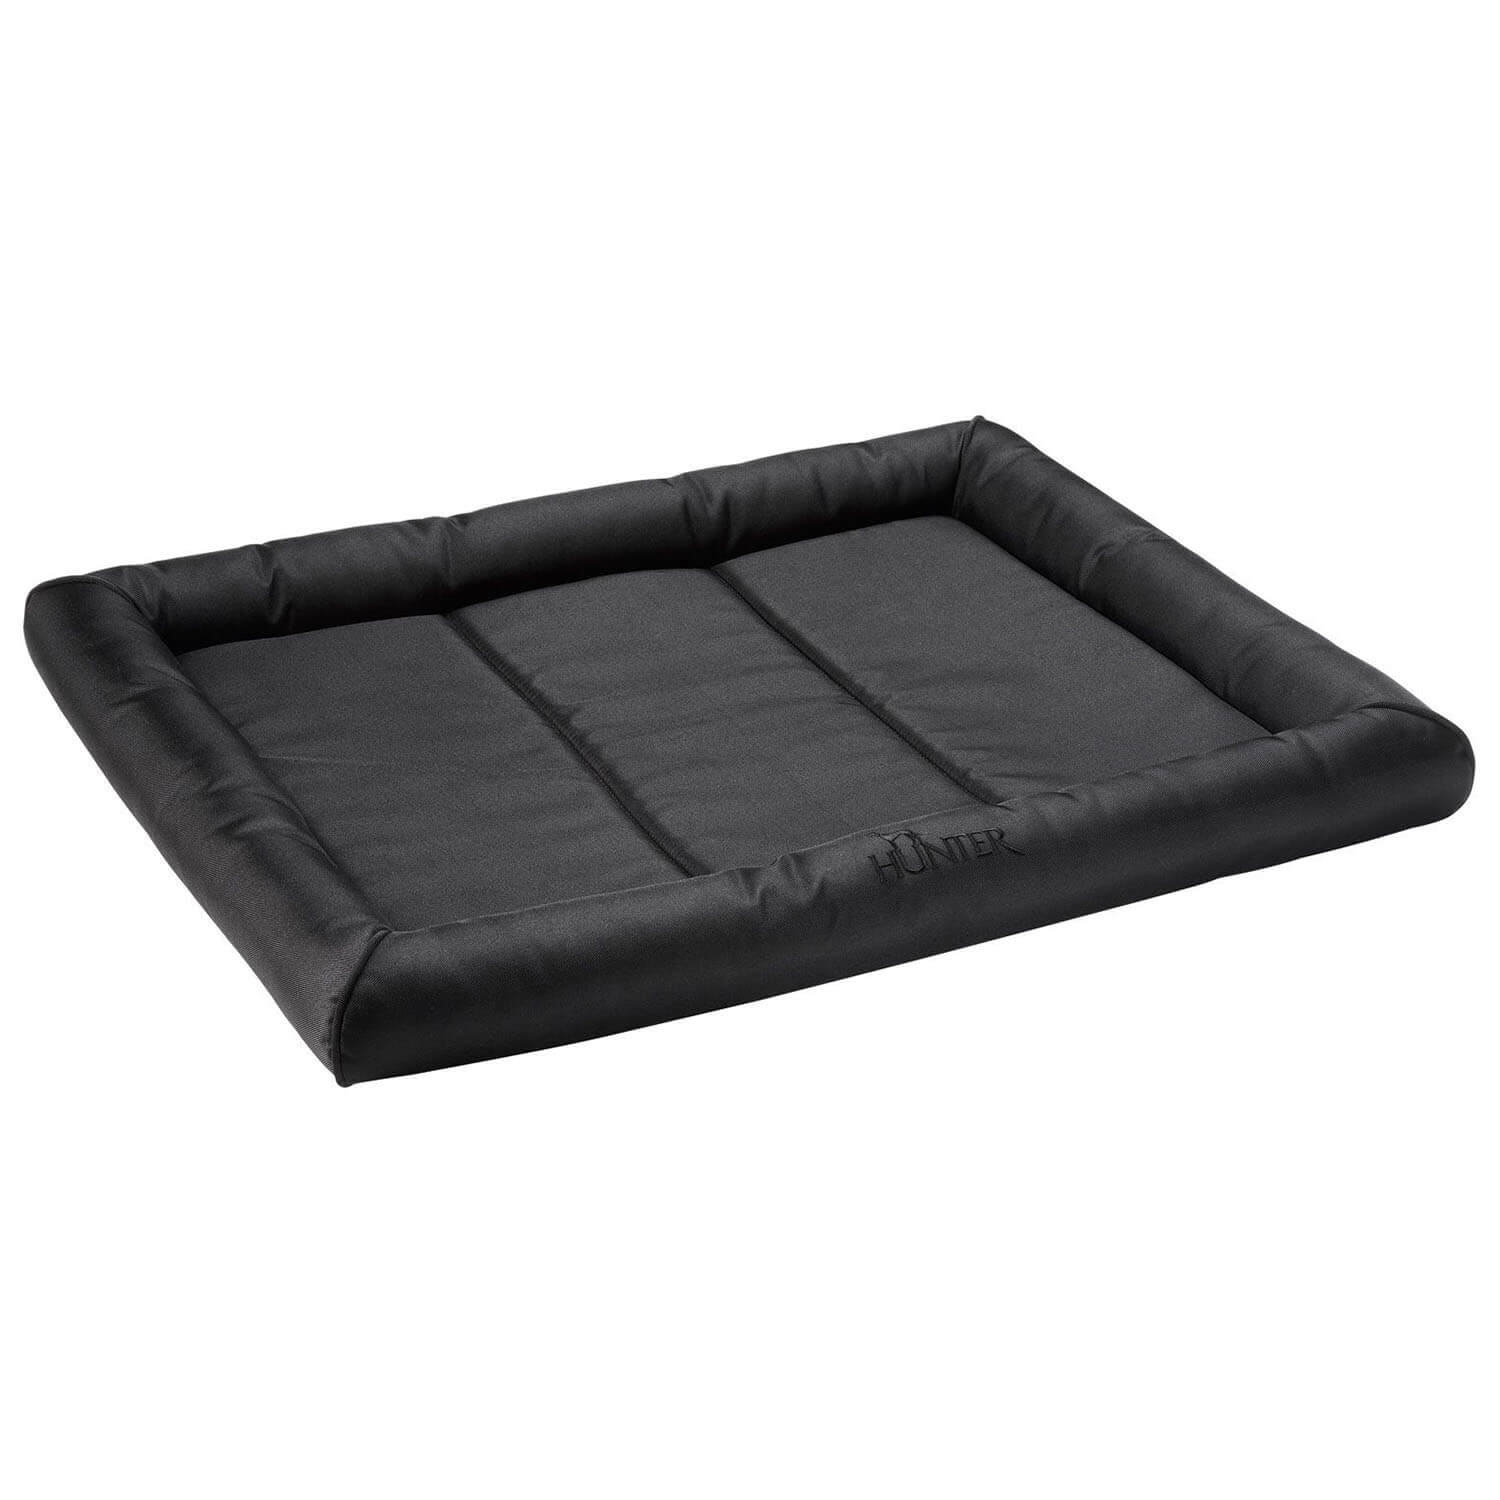 Hunter dogbed vermont (Black) - New Arrivals